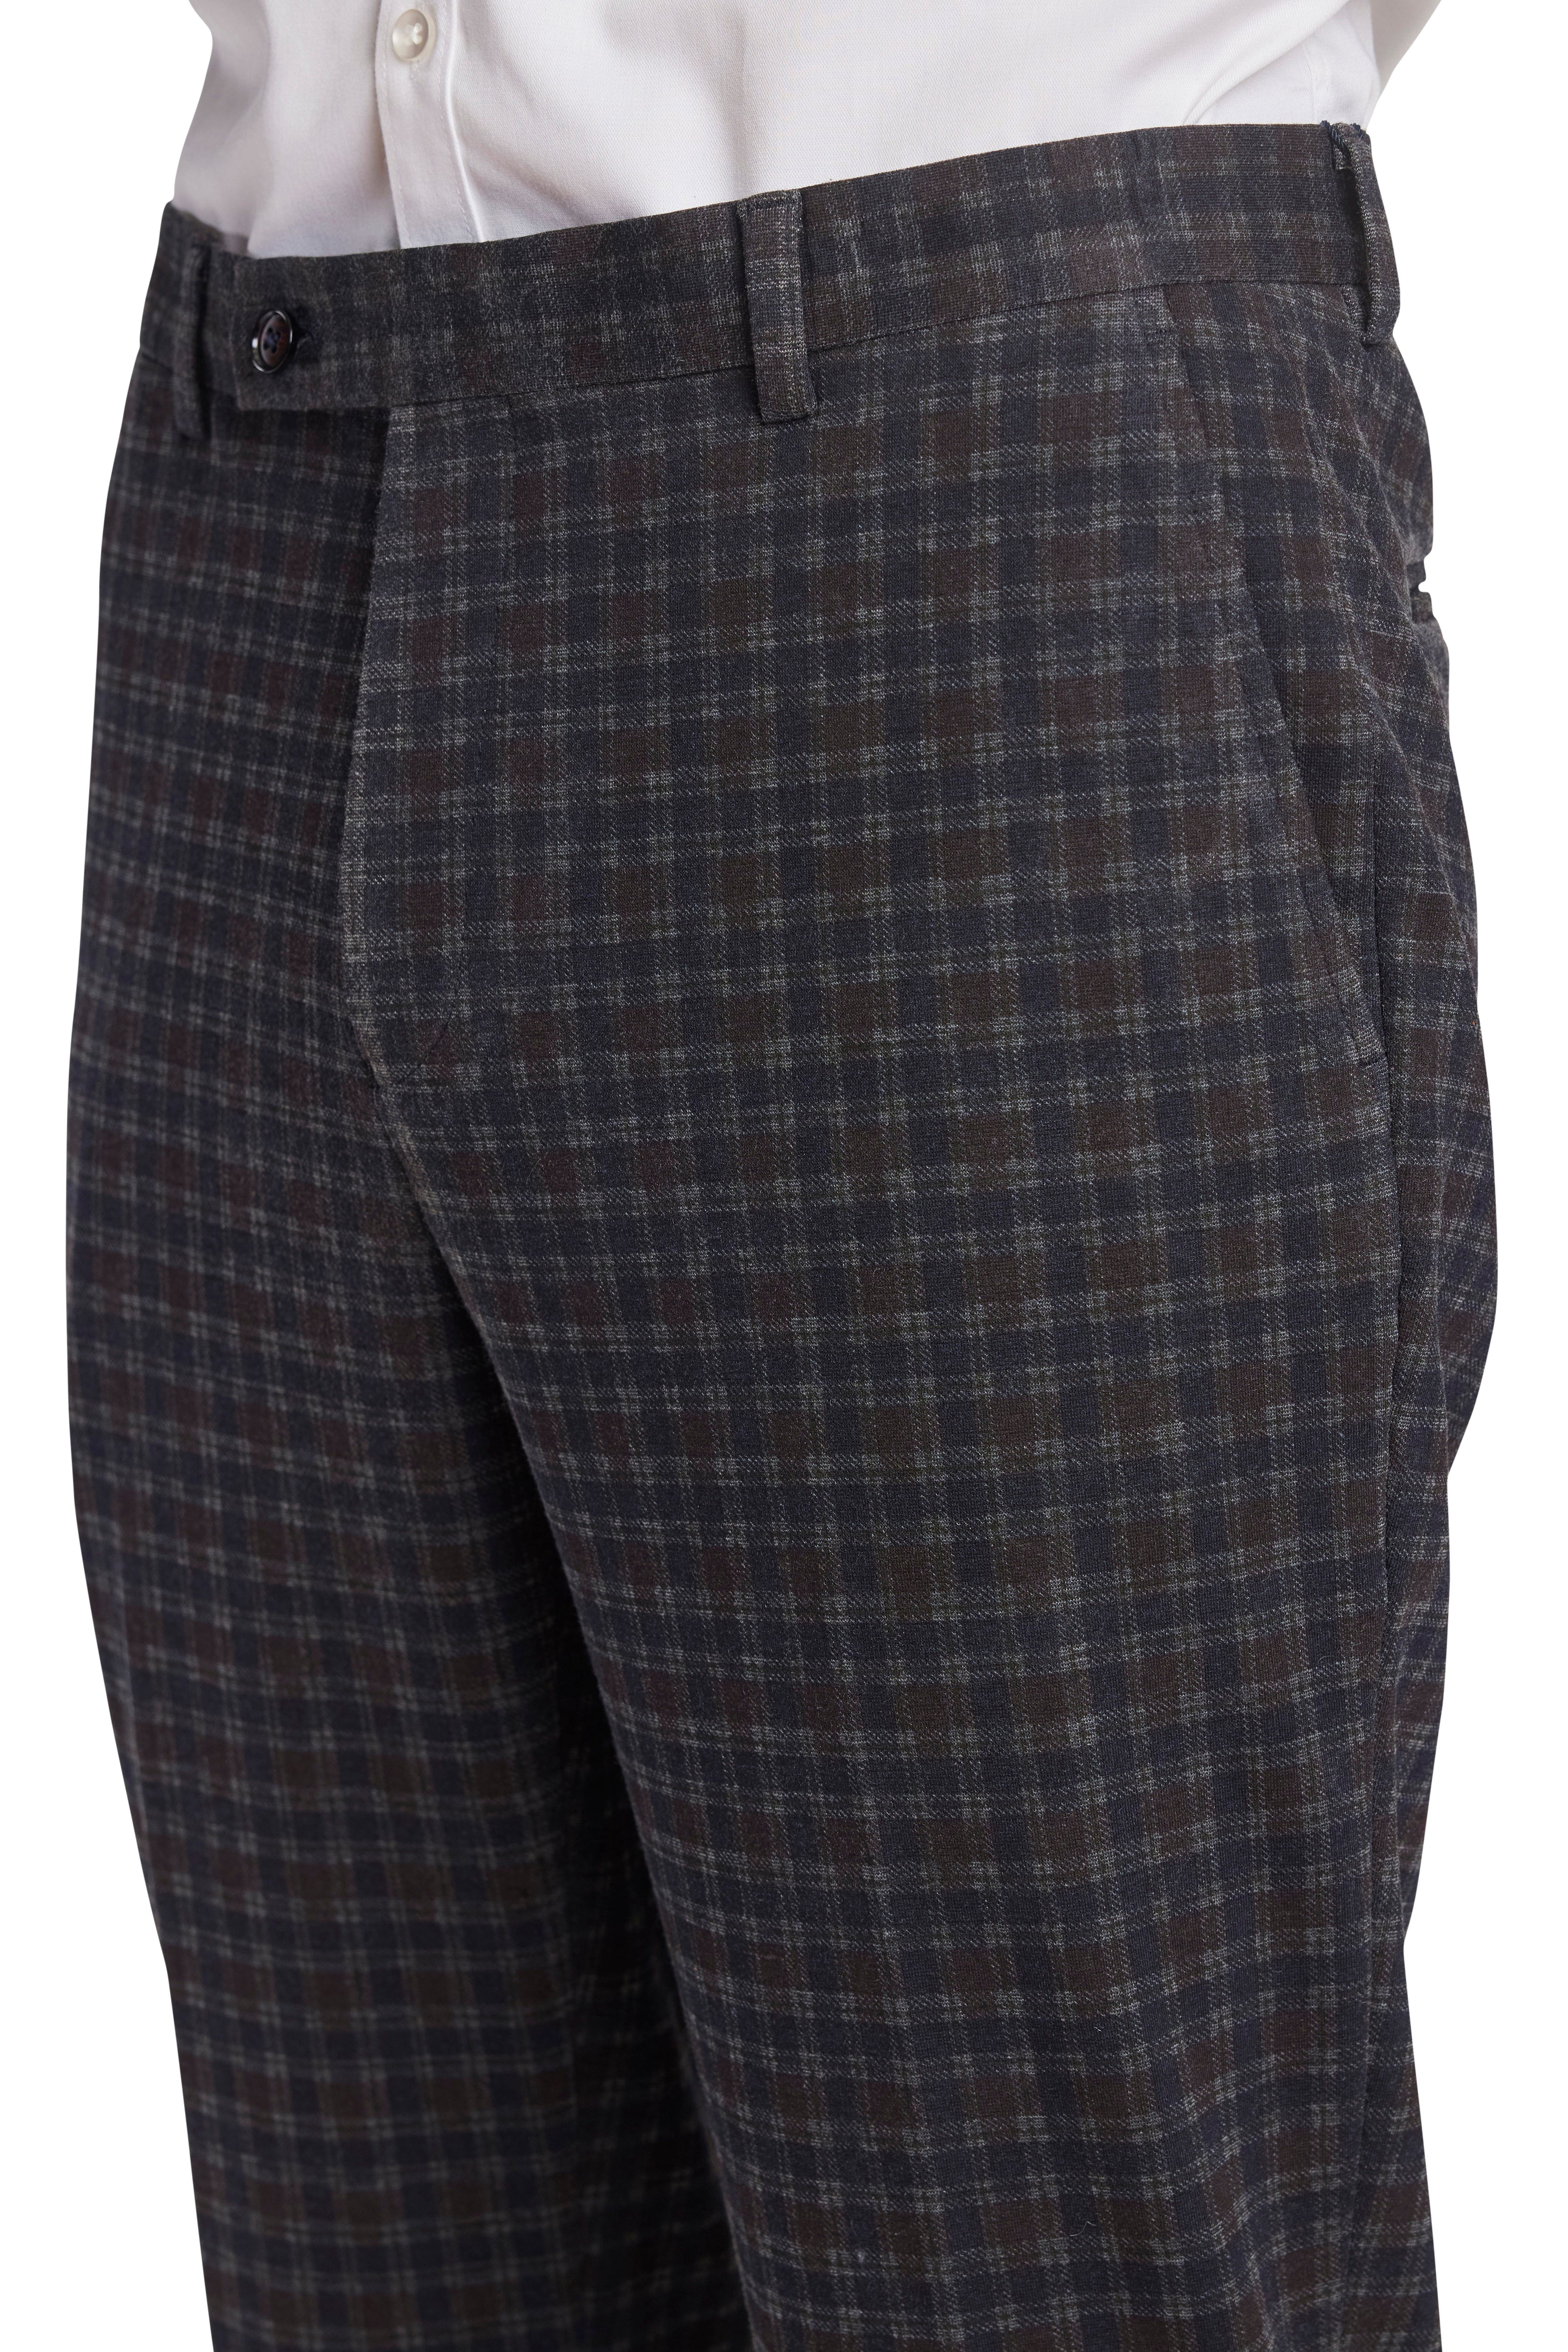 Downing Pants - slim - Wine Navy Little Check